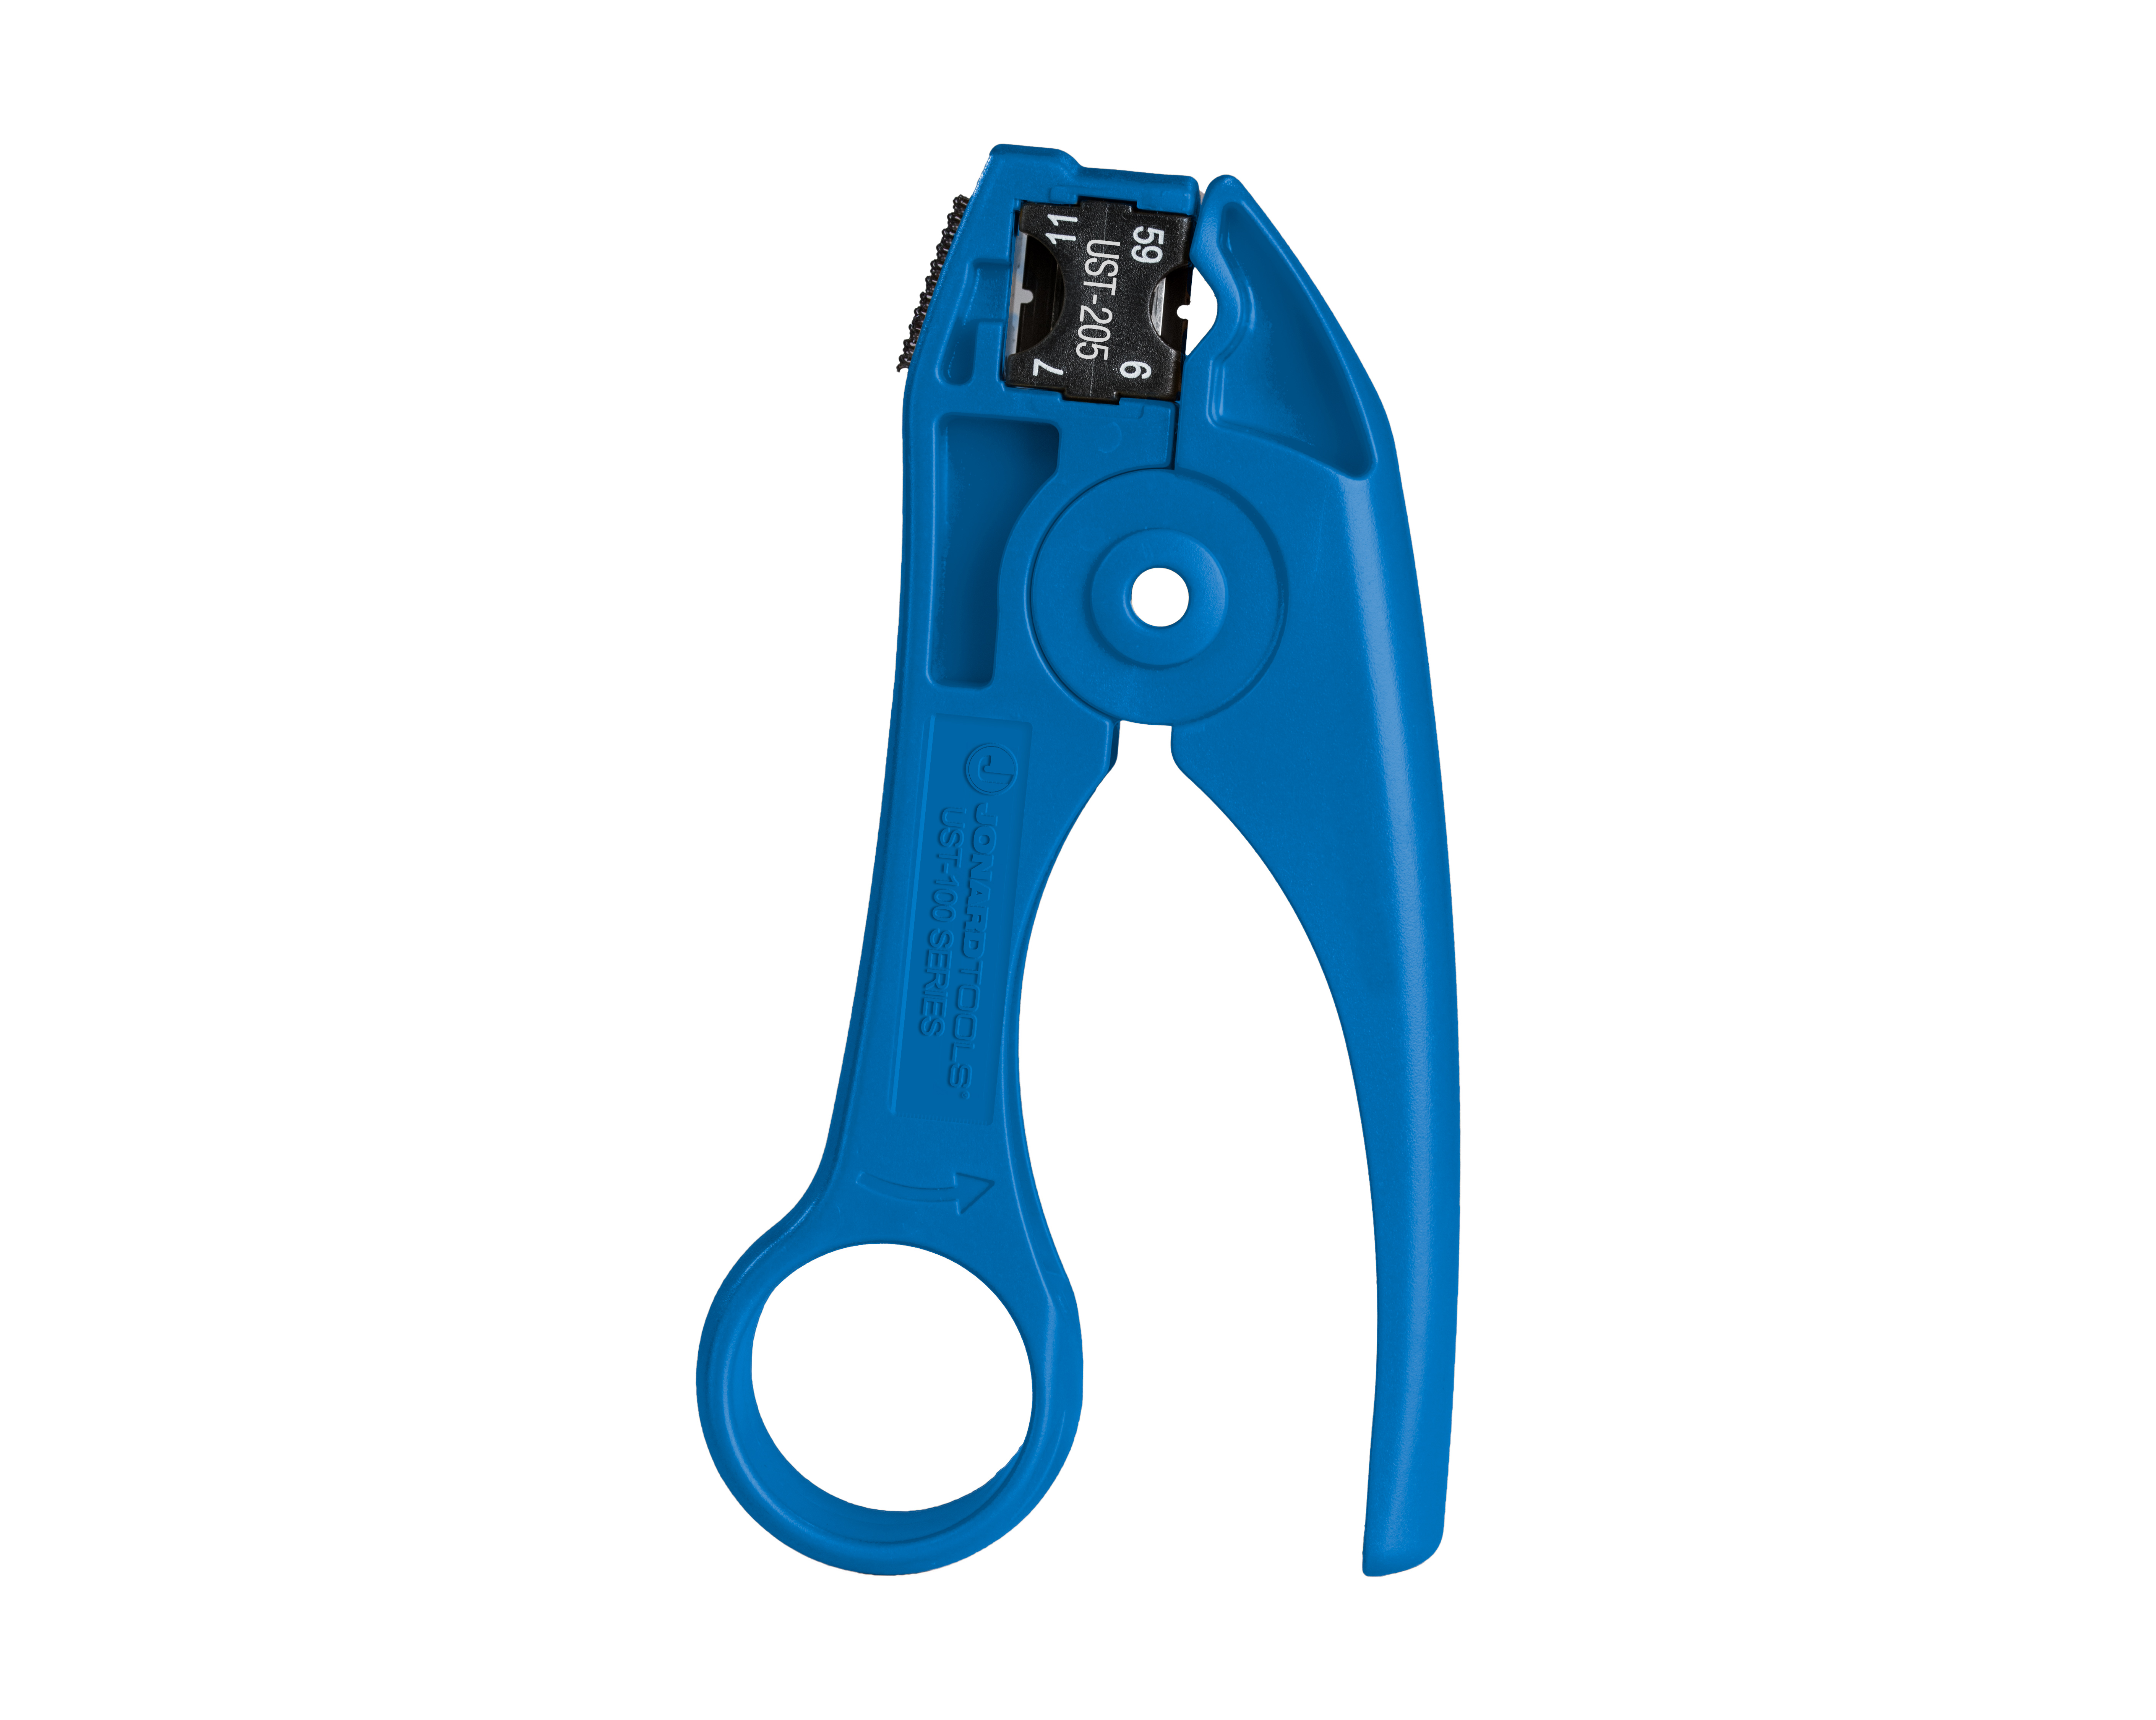 Details about   Stripping Tool Coax Coaxial Cable Wire Pen Cutter Stripper RG59 RG6 RG7 RG11, 